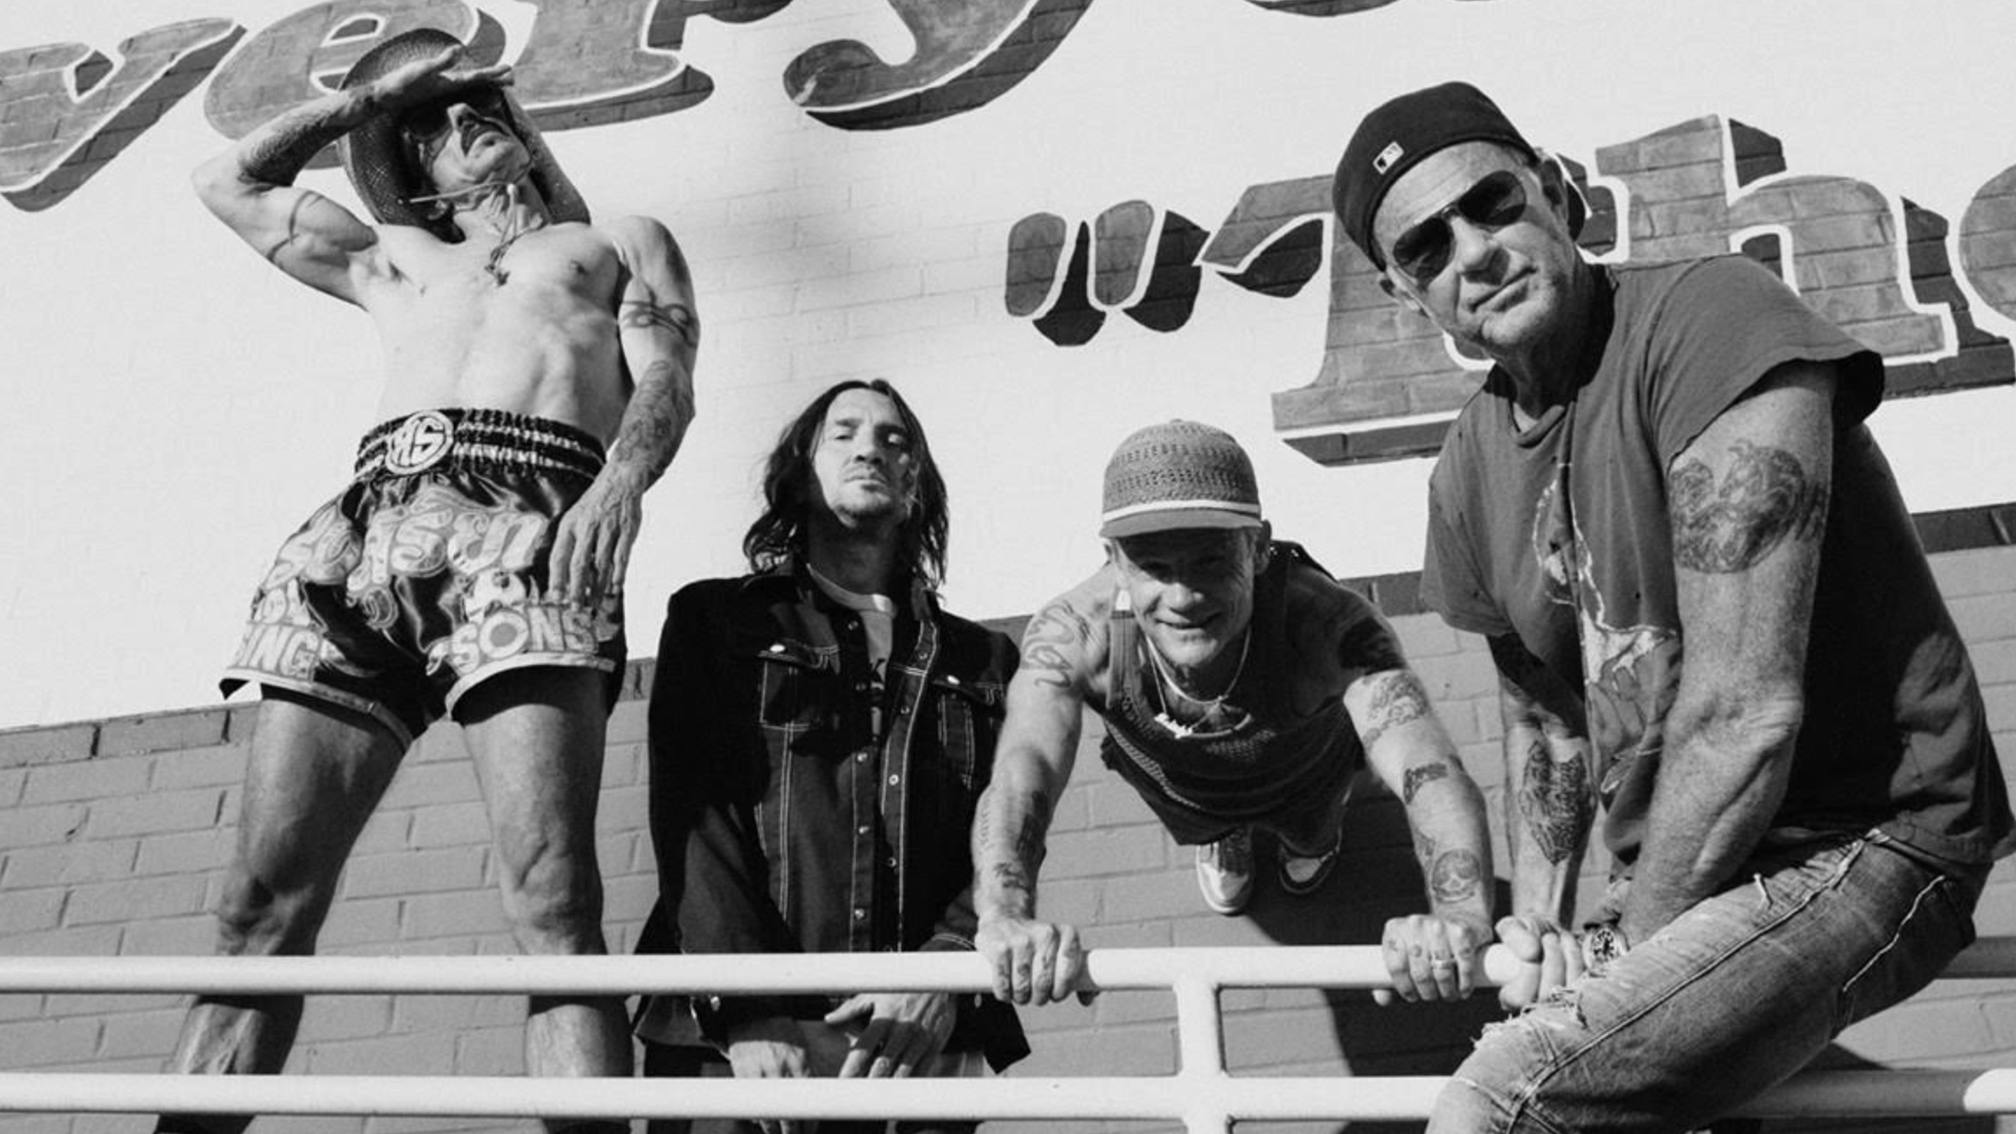 Upcoming Red Hot Chili Peppers album with John Frusciante sounds "different and new"